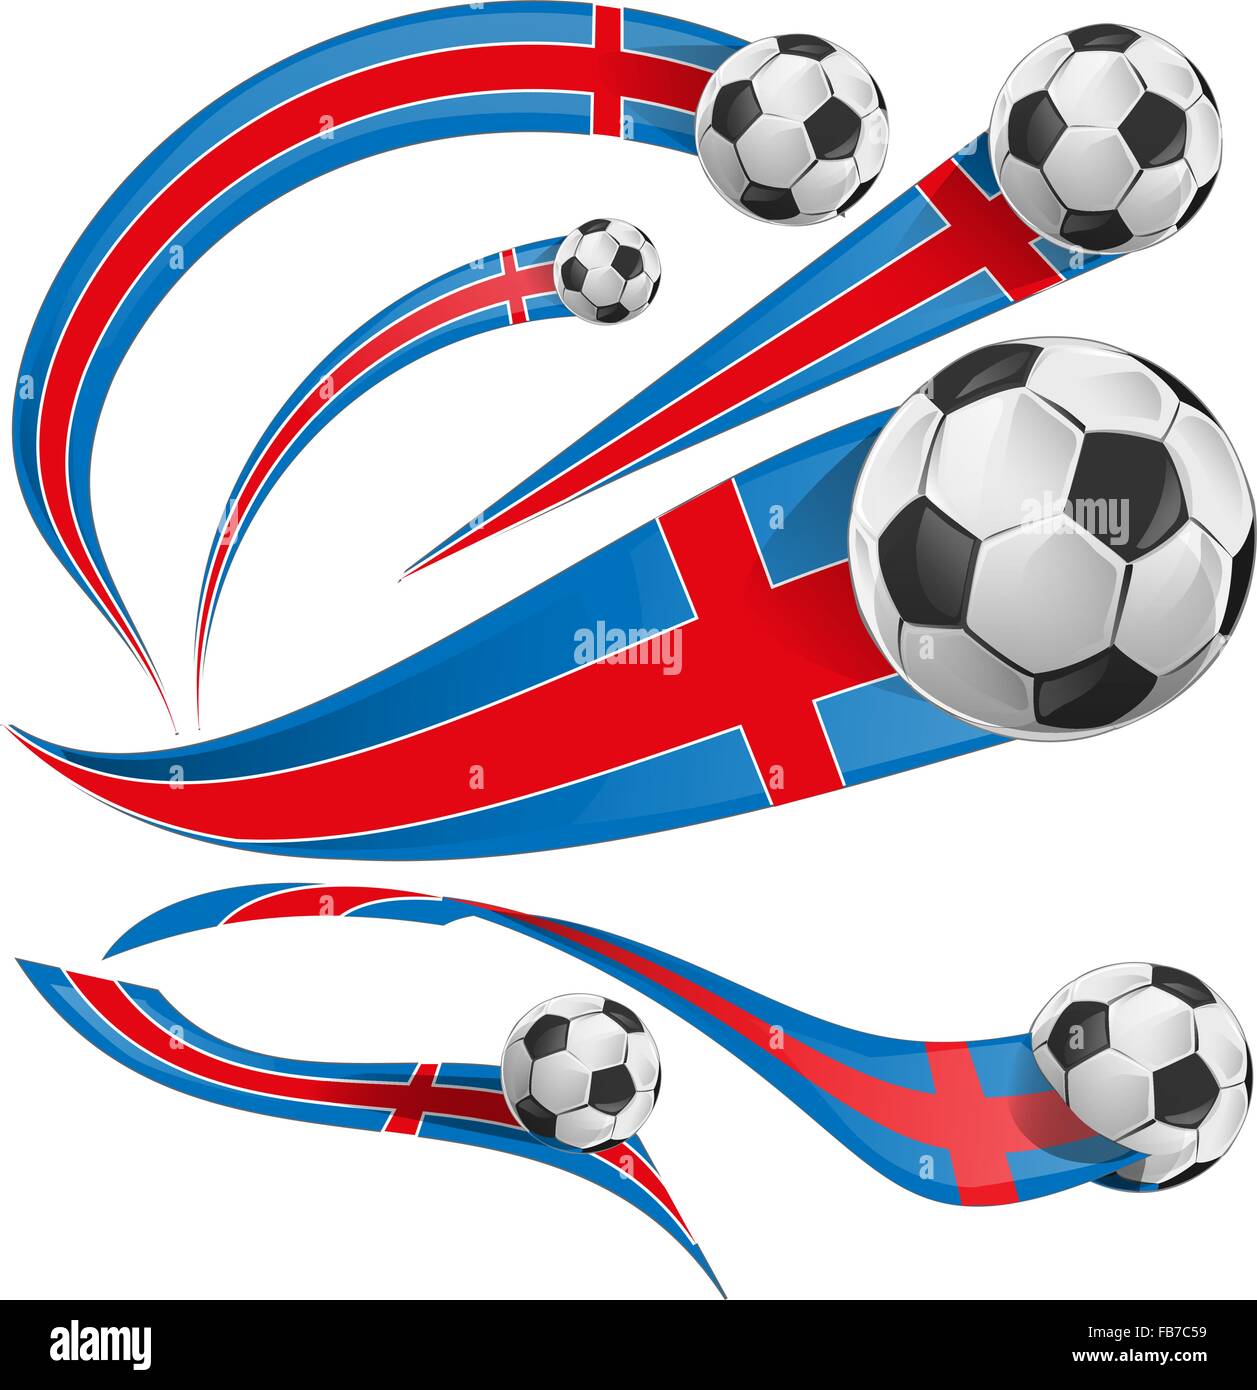 iceland flag with soccer ball isolated Stock Vector